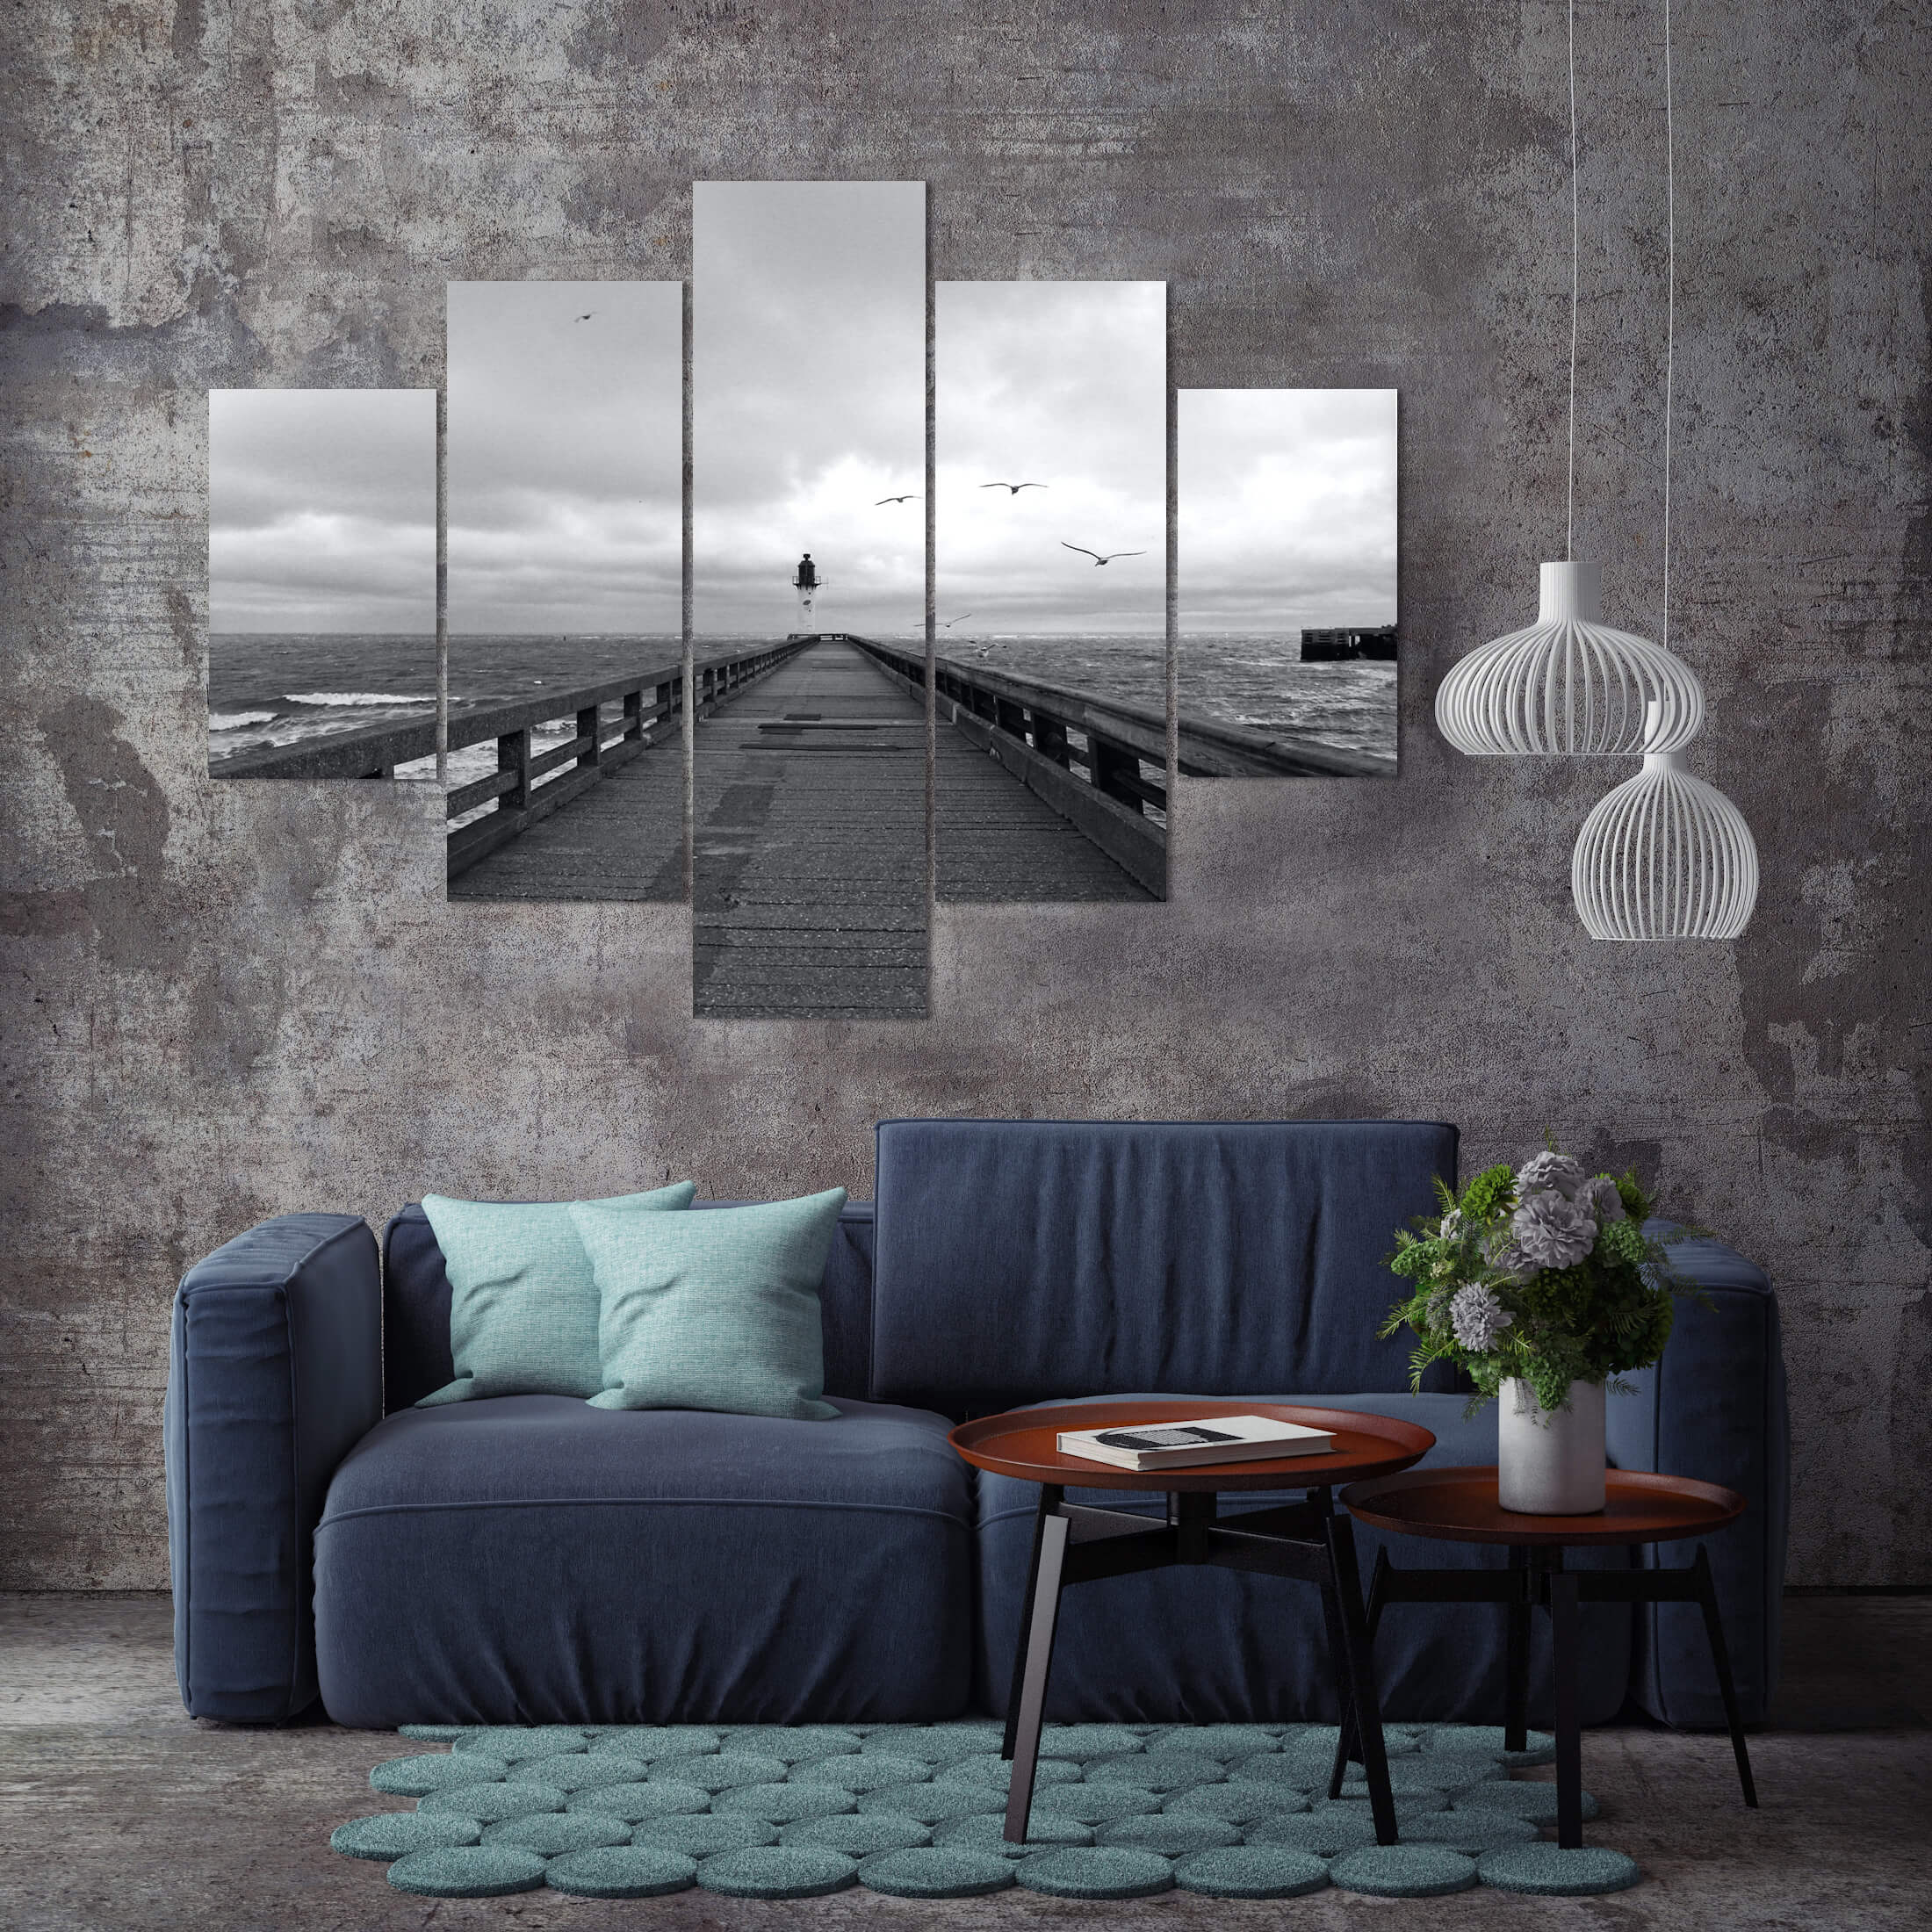 Create your own beautiful split canvas print like this to diaplay your travel photos and print in black and white like this, original colour or speia